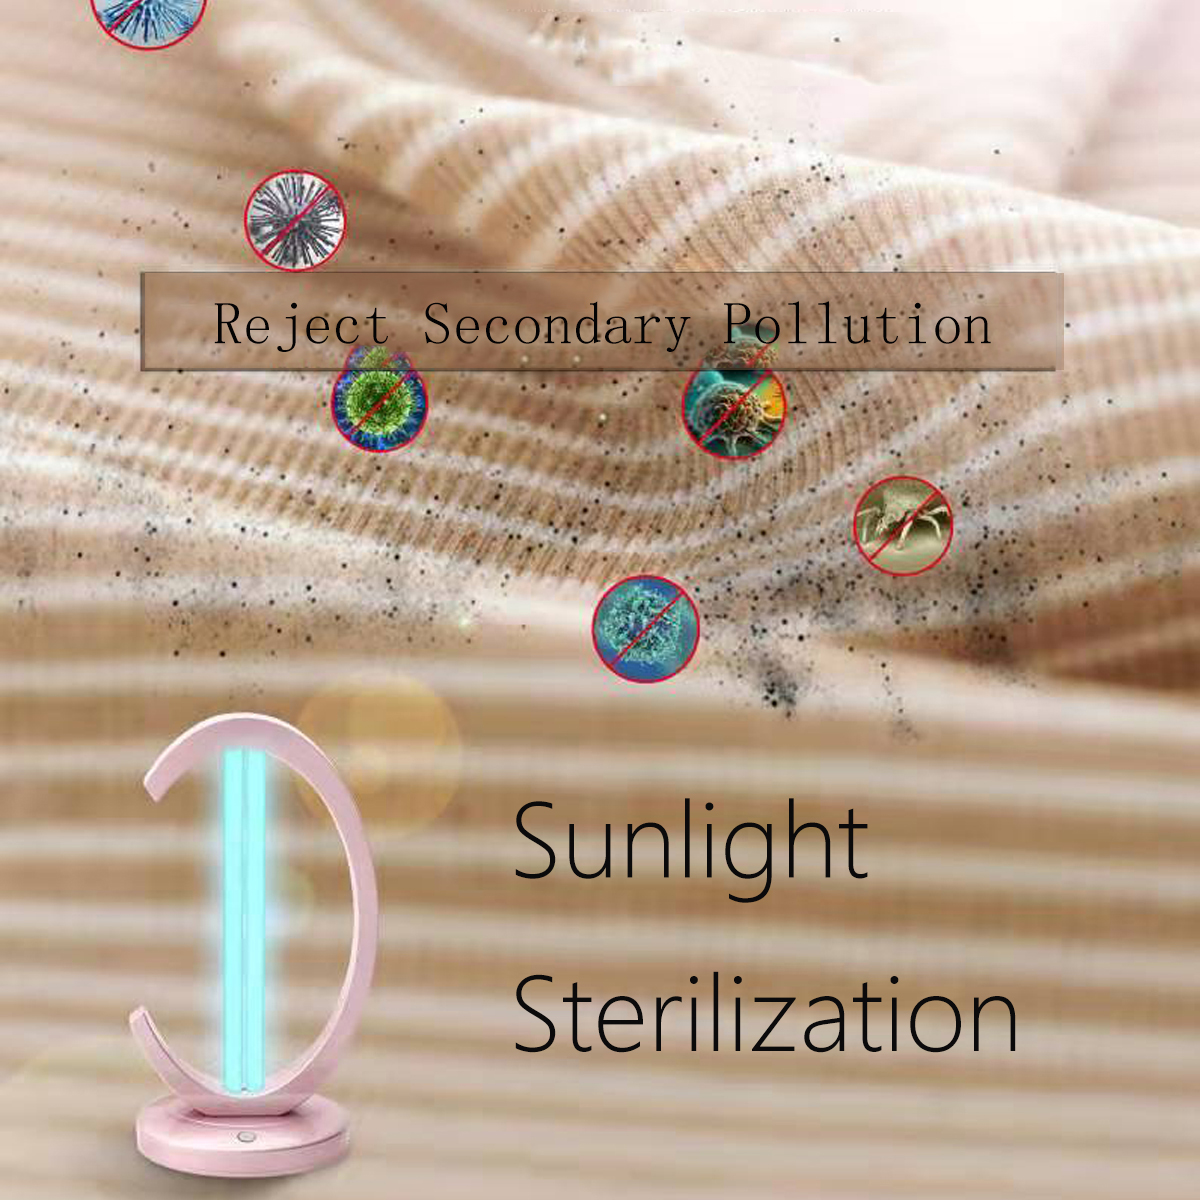 38W-Ultraviolet-Disinfection-Sterilizing-Lamp-with-Remote-Control-Work-for-Bed-Room-Space-Clothing-O-1727576-3